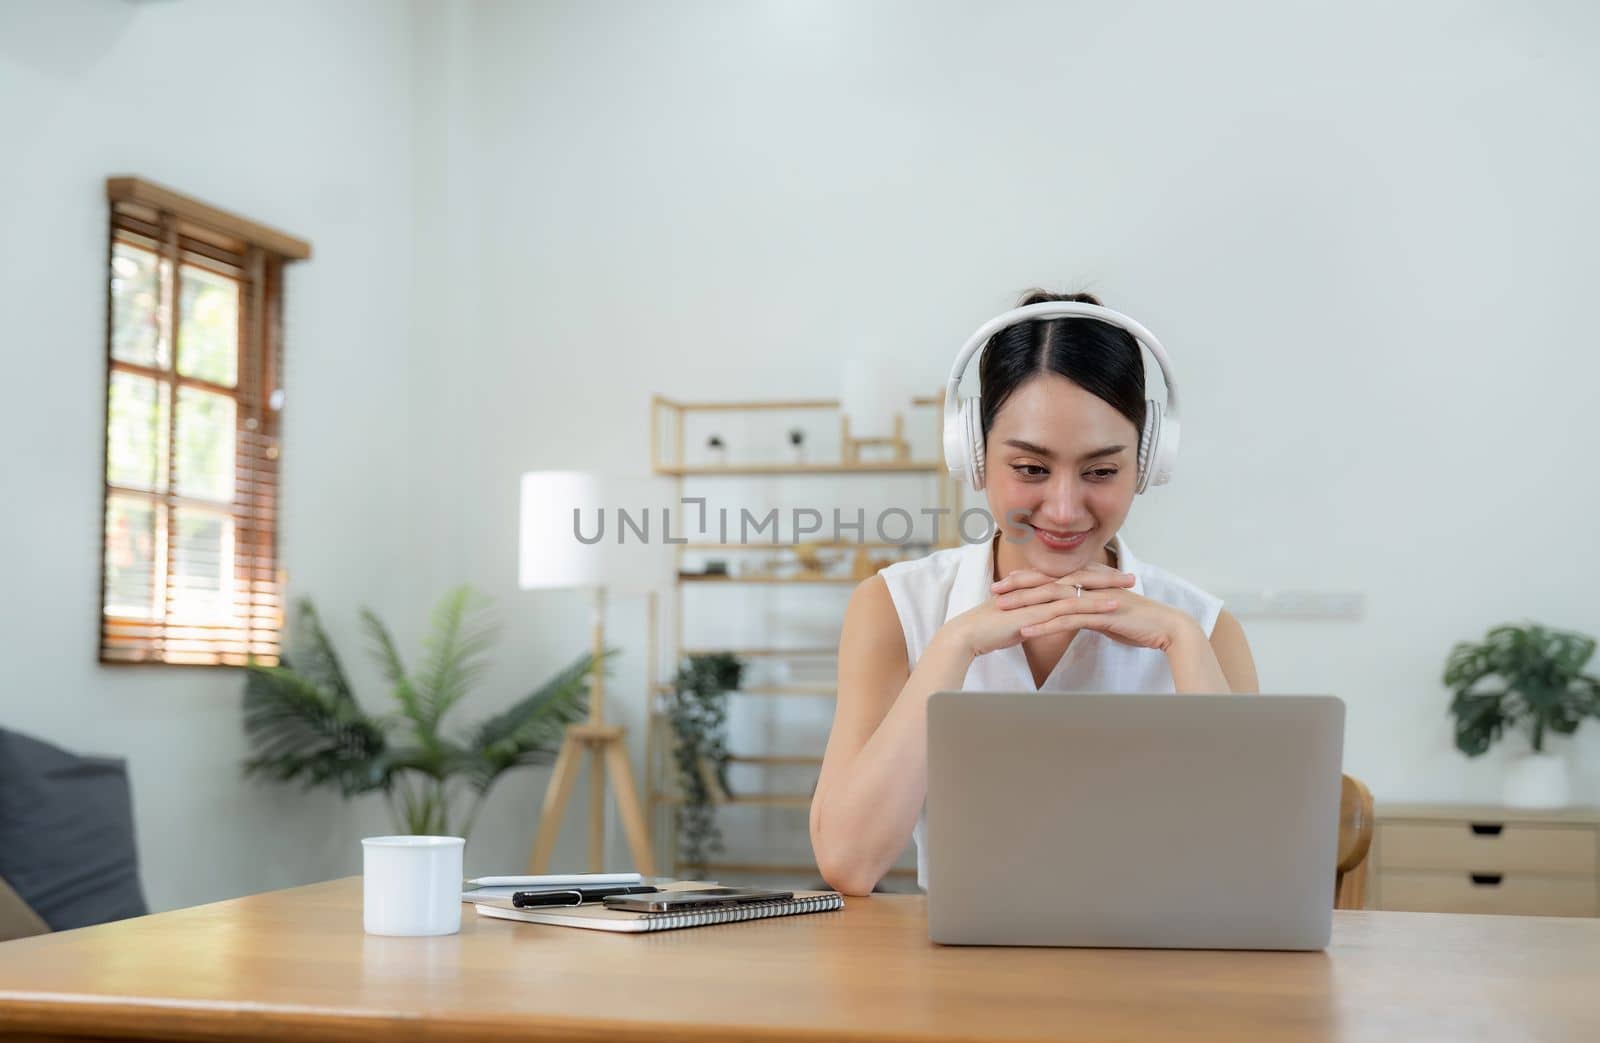 Happy smiling young Business woman with headphone in video call on laptop busy talking, concept of online chat, distance webinar, video conference during work from home. by nateemee